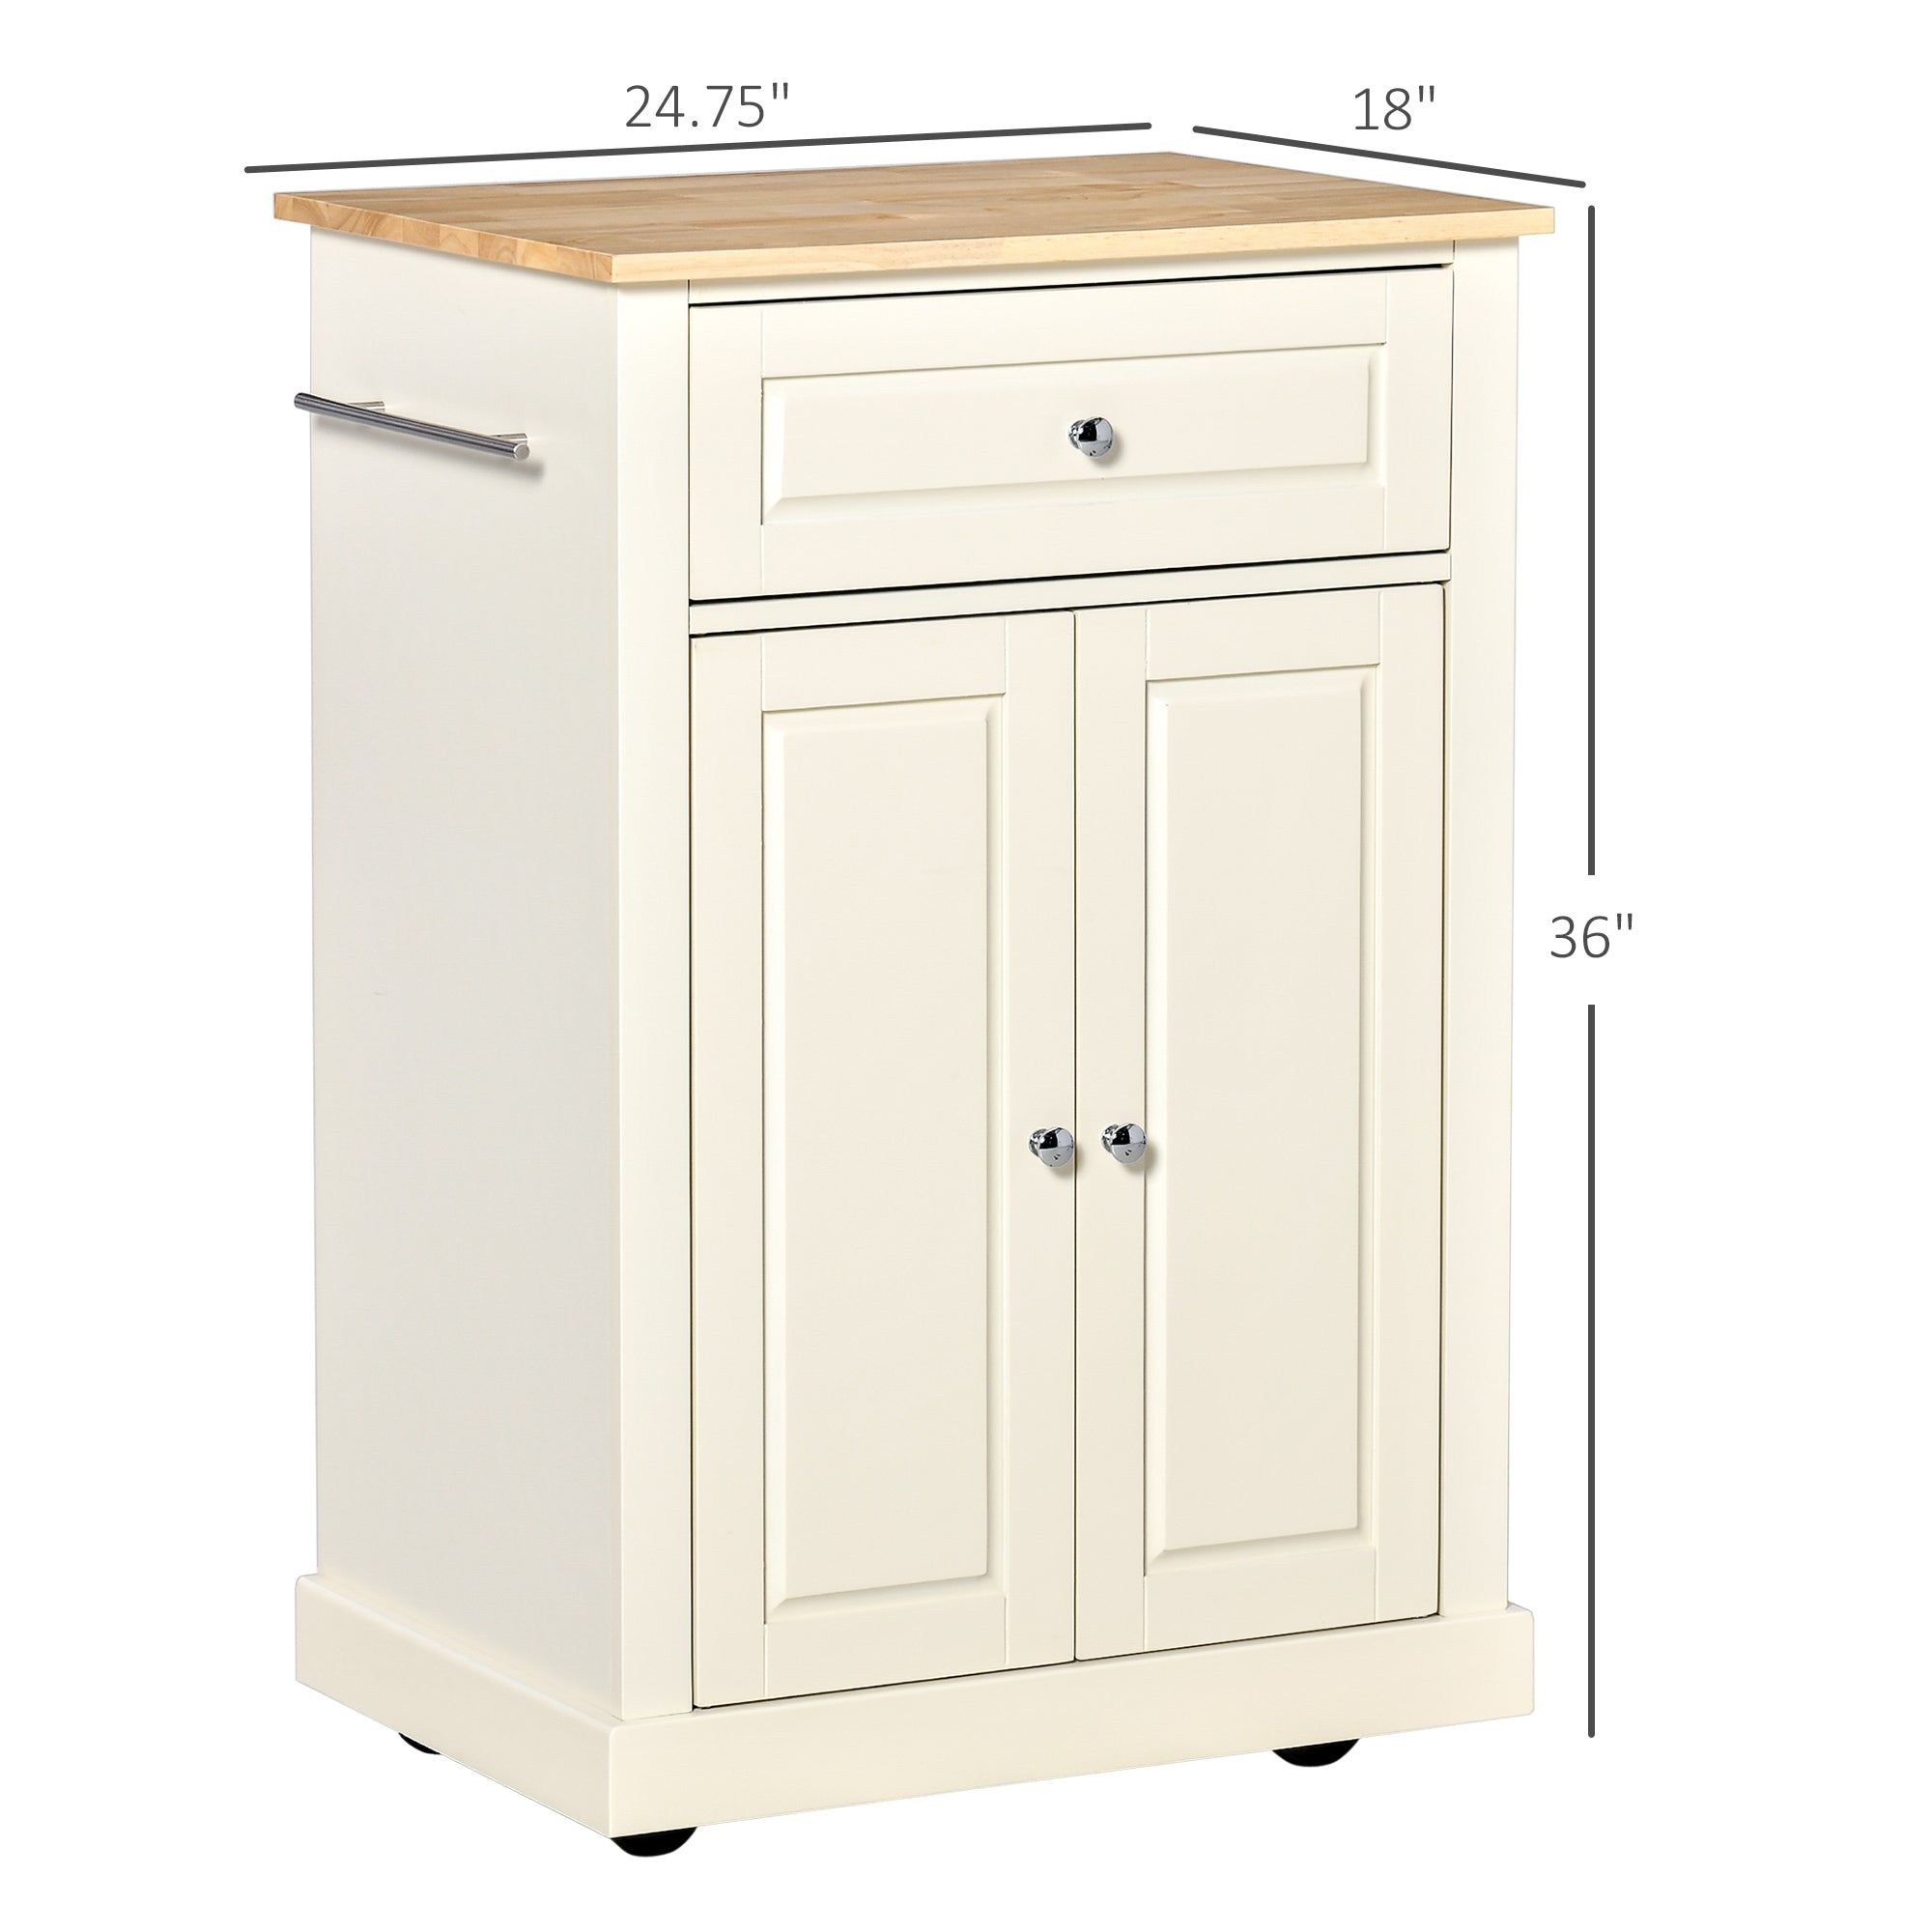 HOMCOM Rolling Kitchen Island Cart， Portable Serving Trolley Table with Drawer， Adjustable Shelf and 2 Towel Racks， Cream White